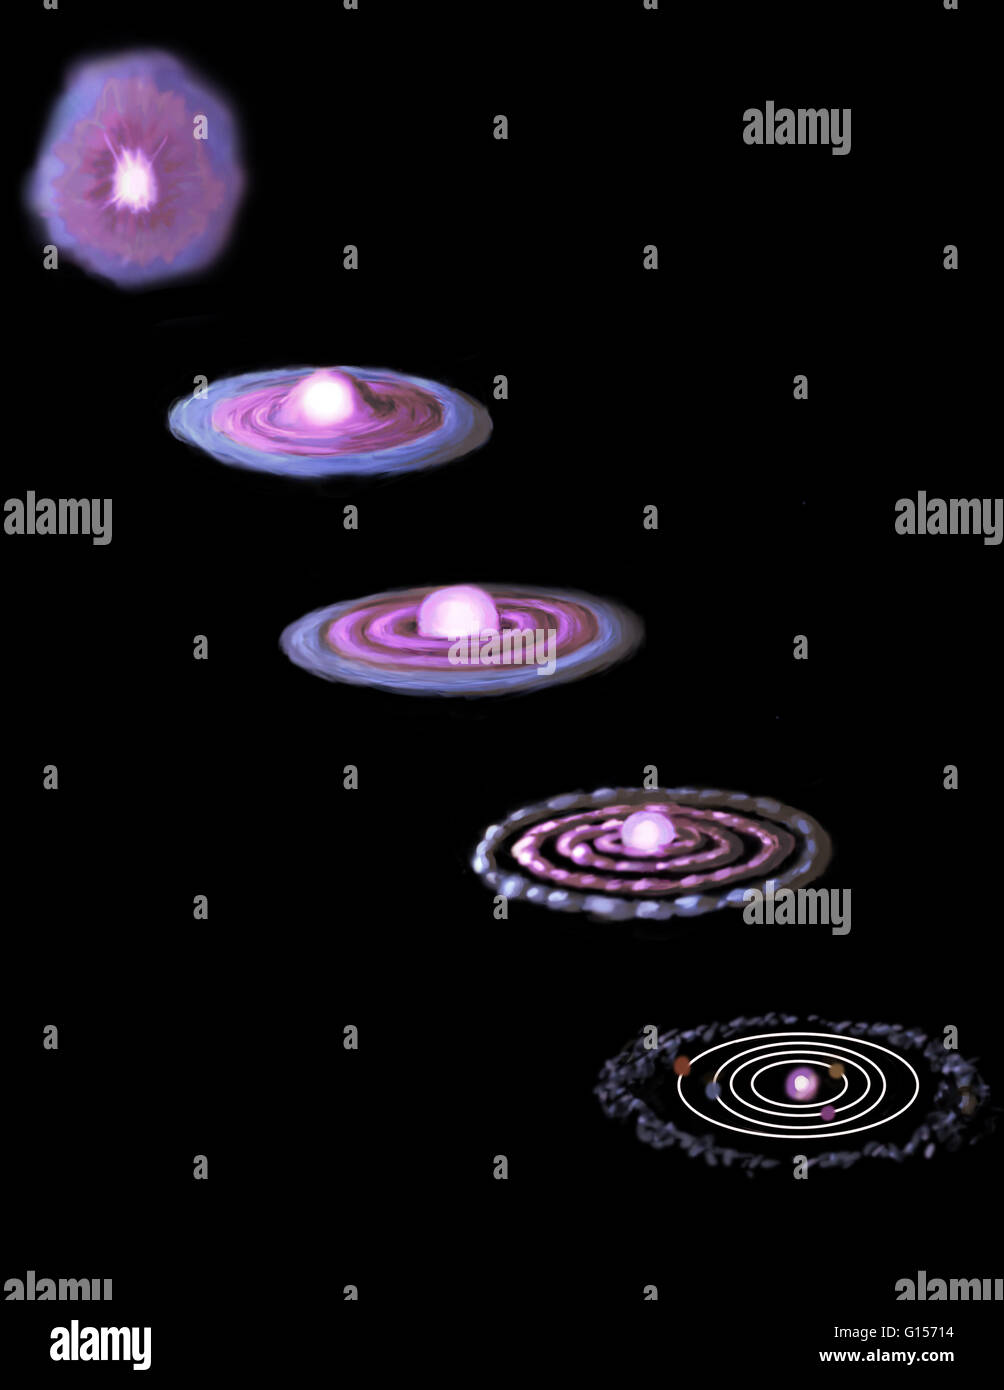 formation of the solar system